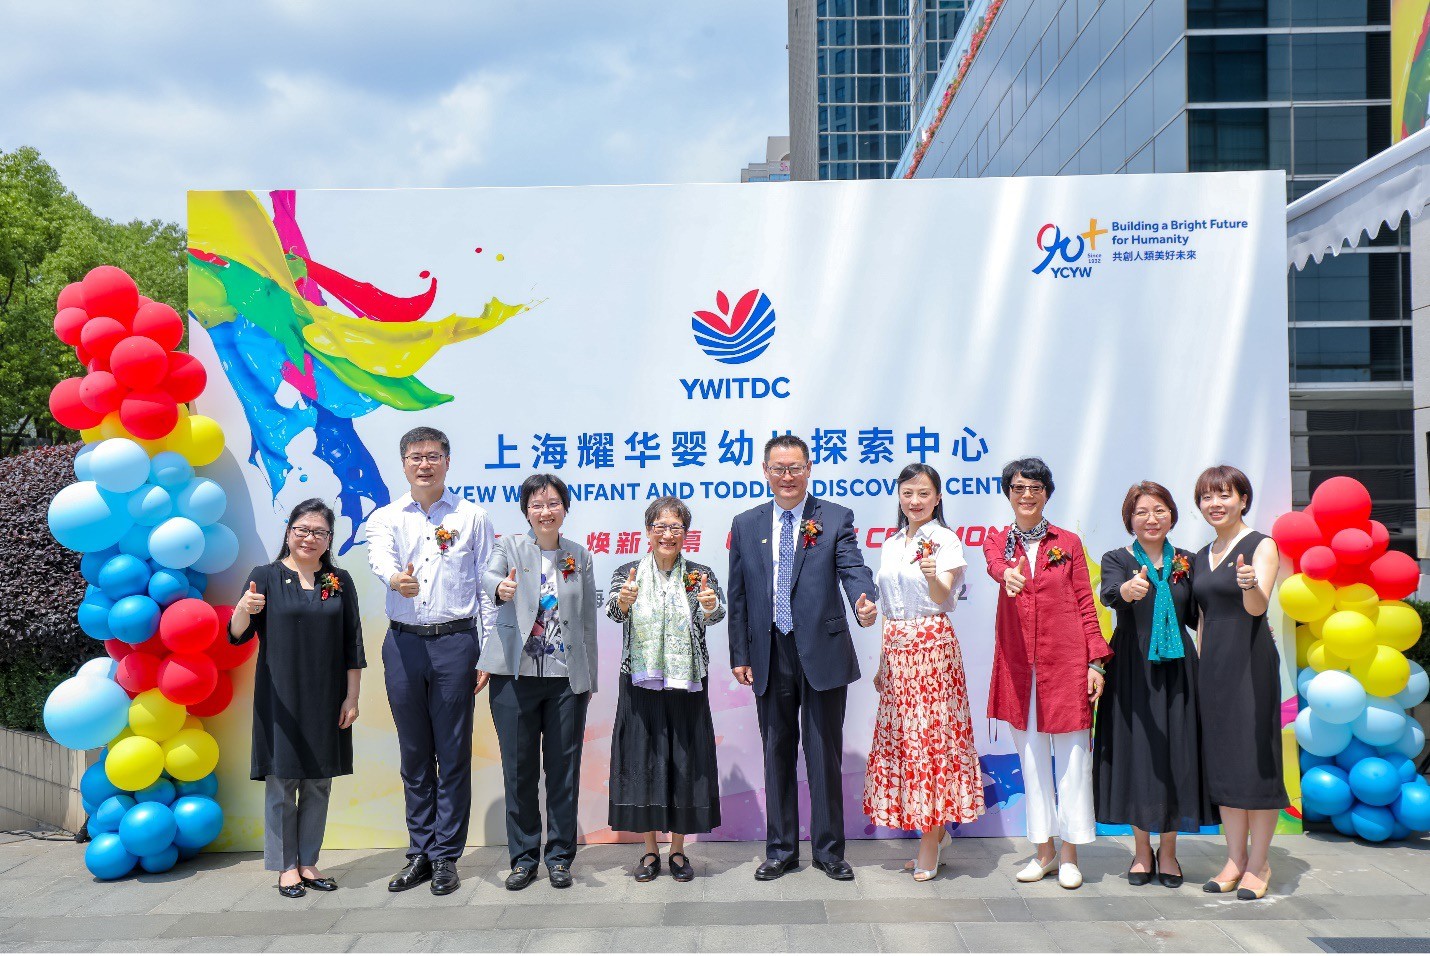 Dr Betty Chan (4th to the left), CEO and School Director of Yew Chung Yew Wah Education Network, Dr Xuejun Xu (5th to the left), Deputy Chief Executive Officer & Chief Business Development Officer, other institutional leaders, Changning District officials including Kai Guo (2nd to the left), Director of Hongqiao Sub-district, and Wei Weng (4th to the right), Chairperson of Xianxia Sub-district Women's Federation, attended the opening ceremony.